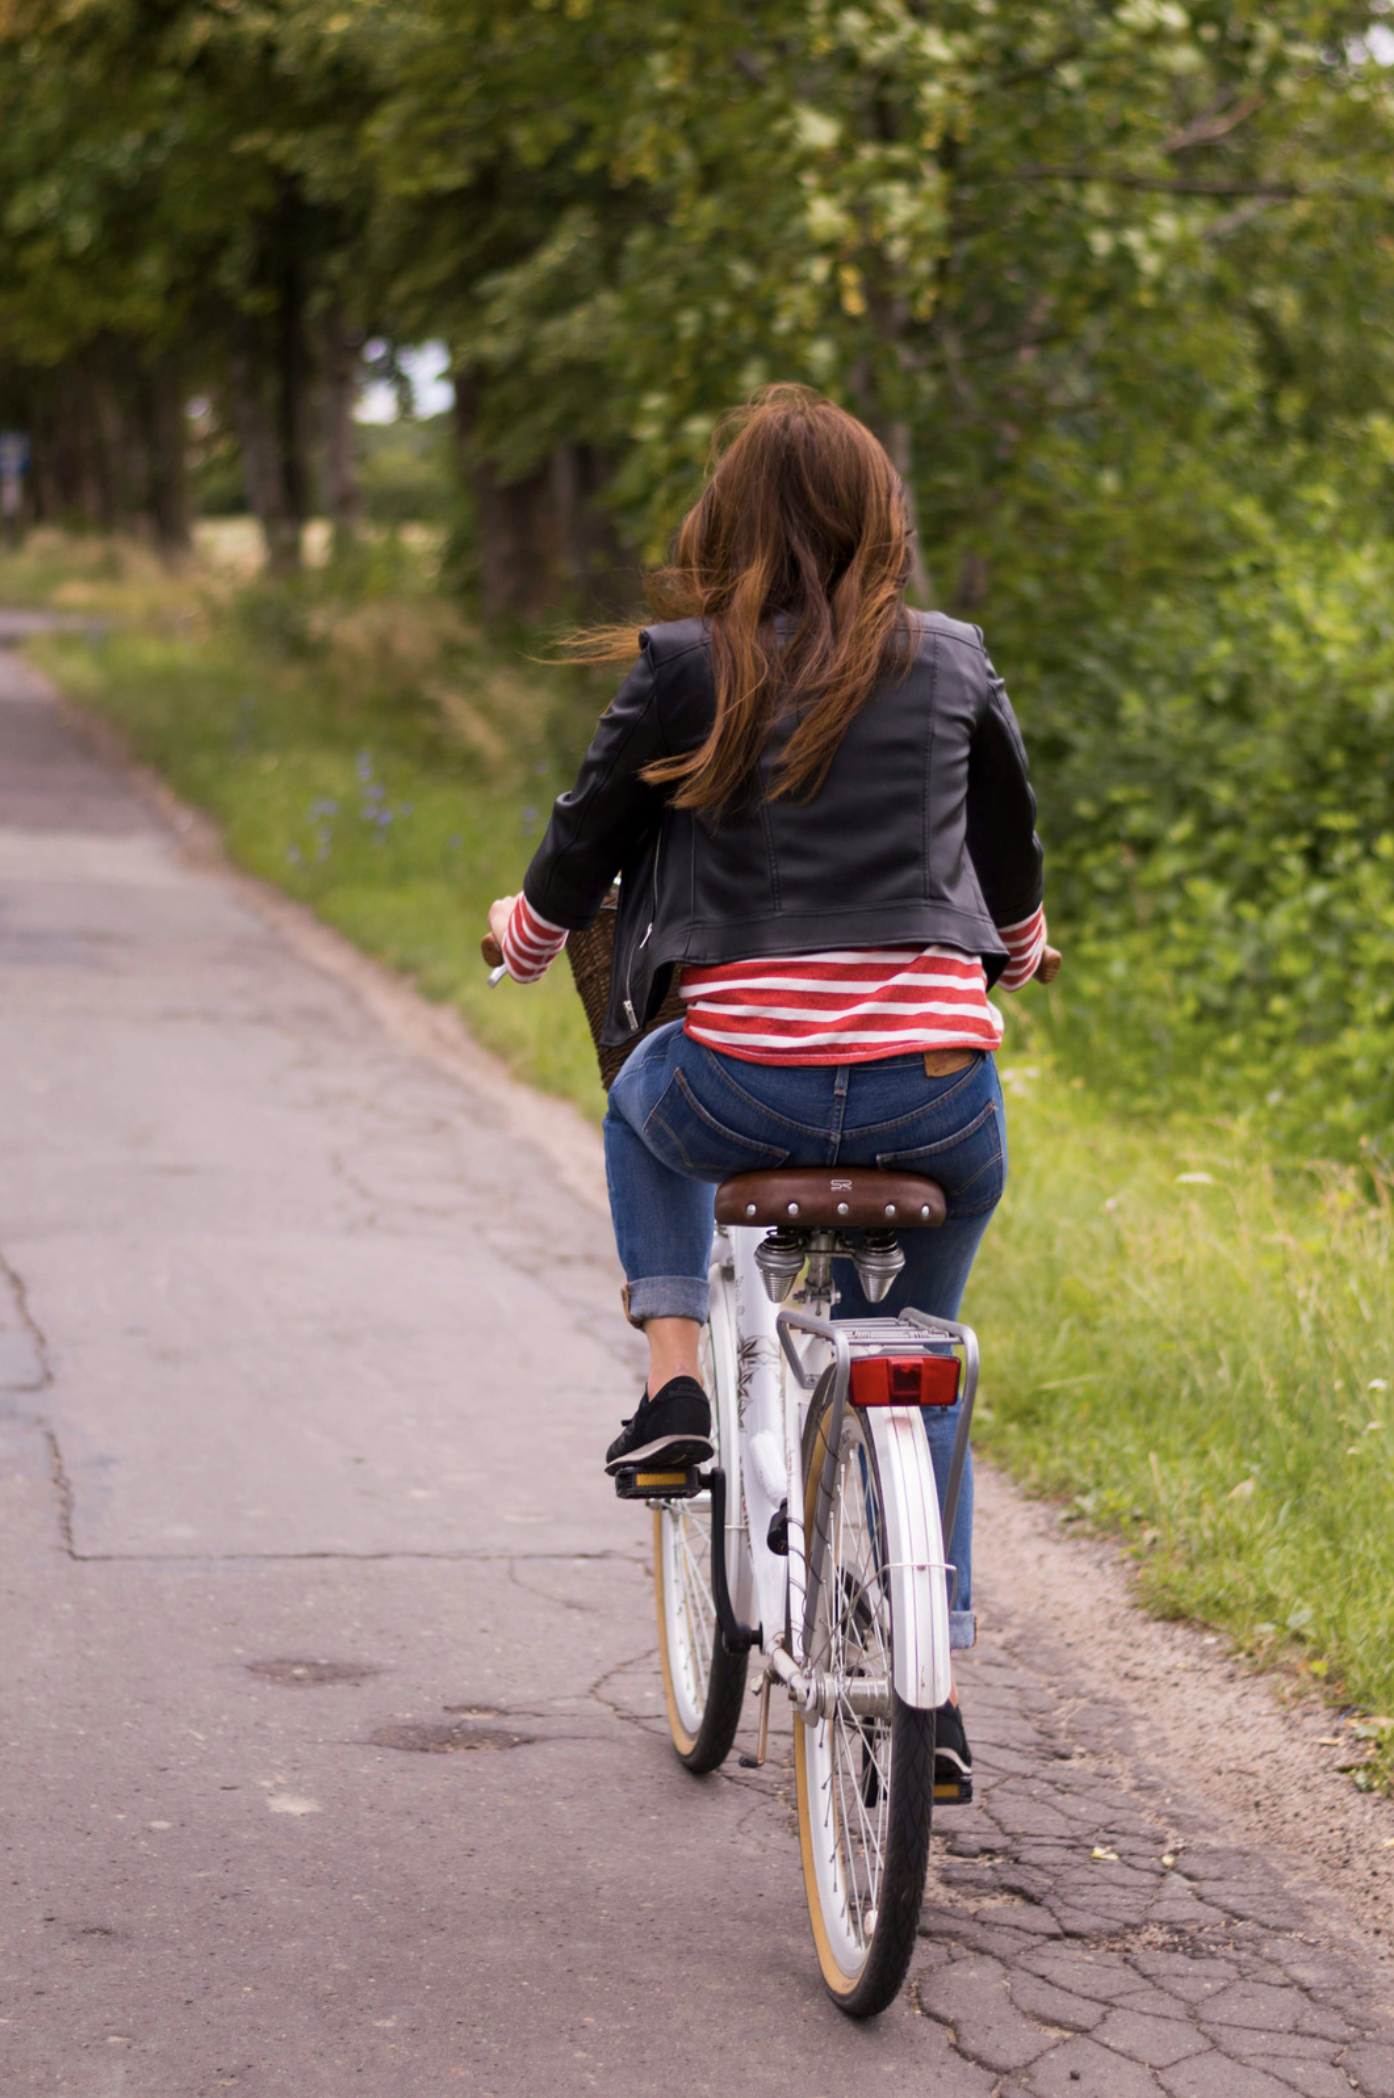 rear view of a young woman riding a bike on an old road with green grass and trees surrounding the road. She has long brunette hair blowing in the wind and is wearing a black leather jacket with a white and red stripped shirt, jeans and black shoes